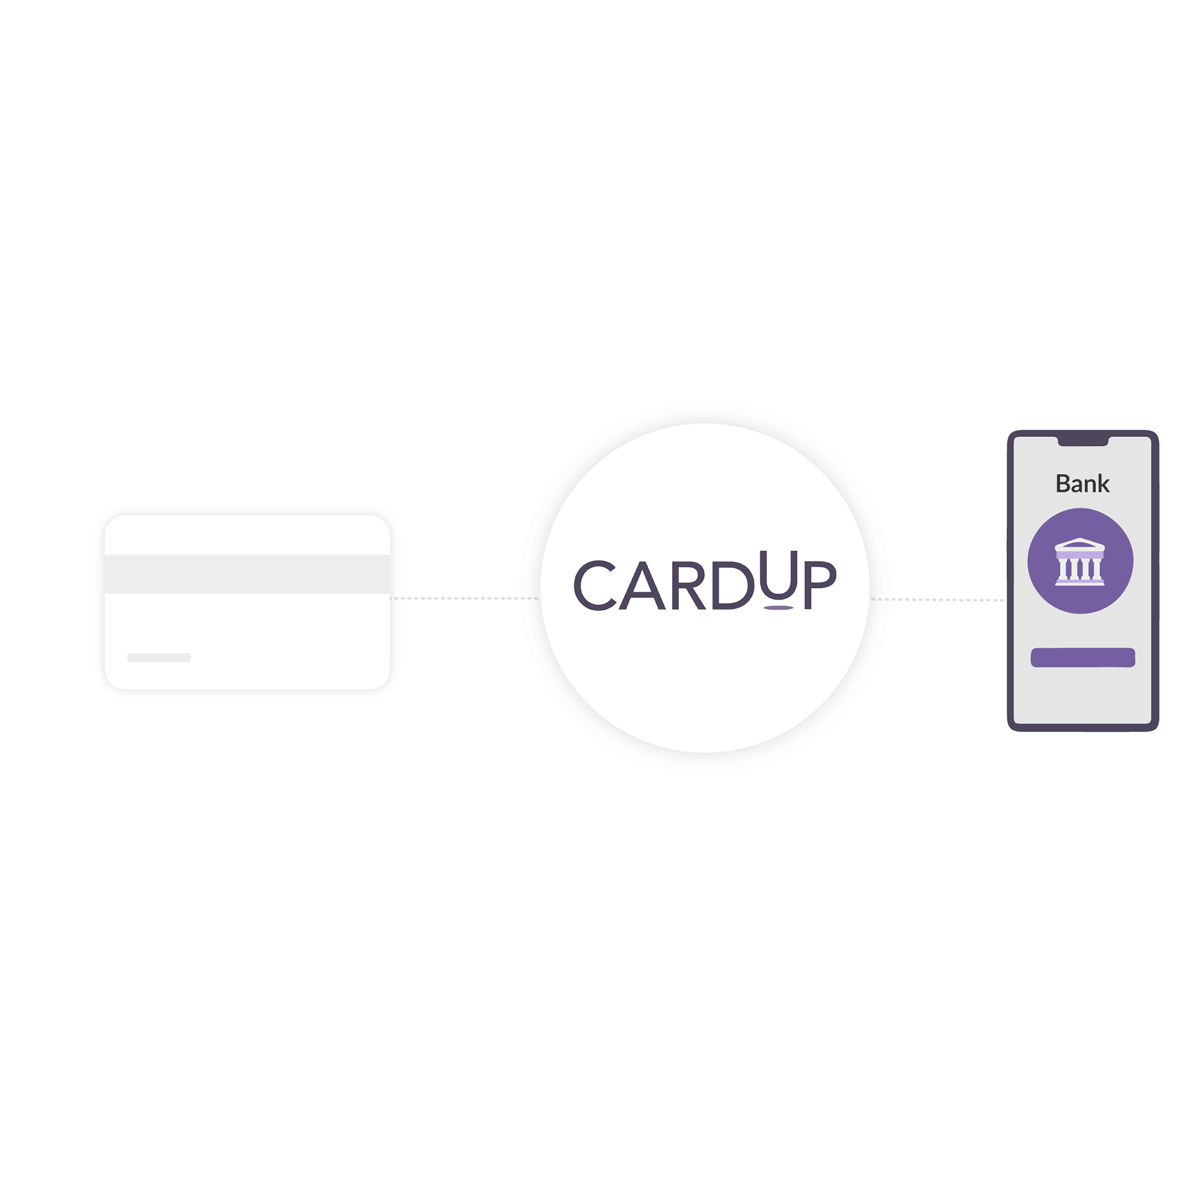 Pay using your credit card through CardUp, and CardUp transfer the payment to recipient via bank transfer